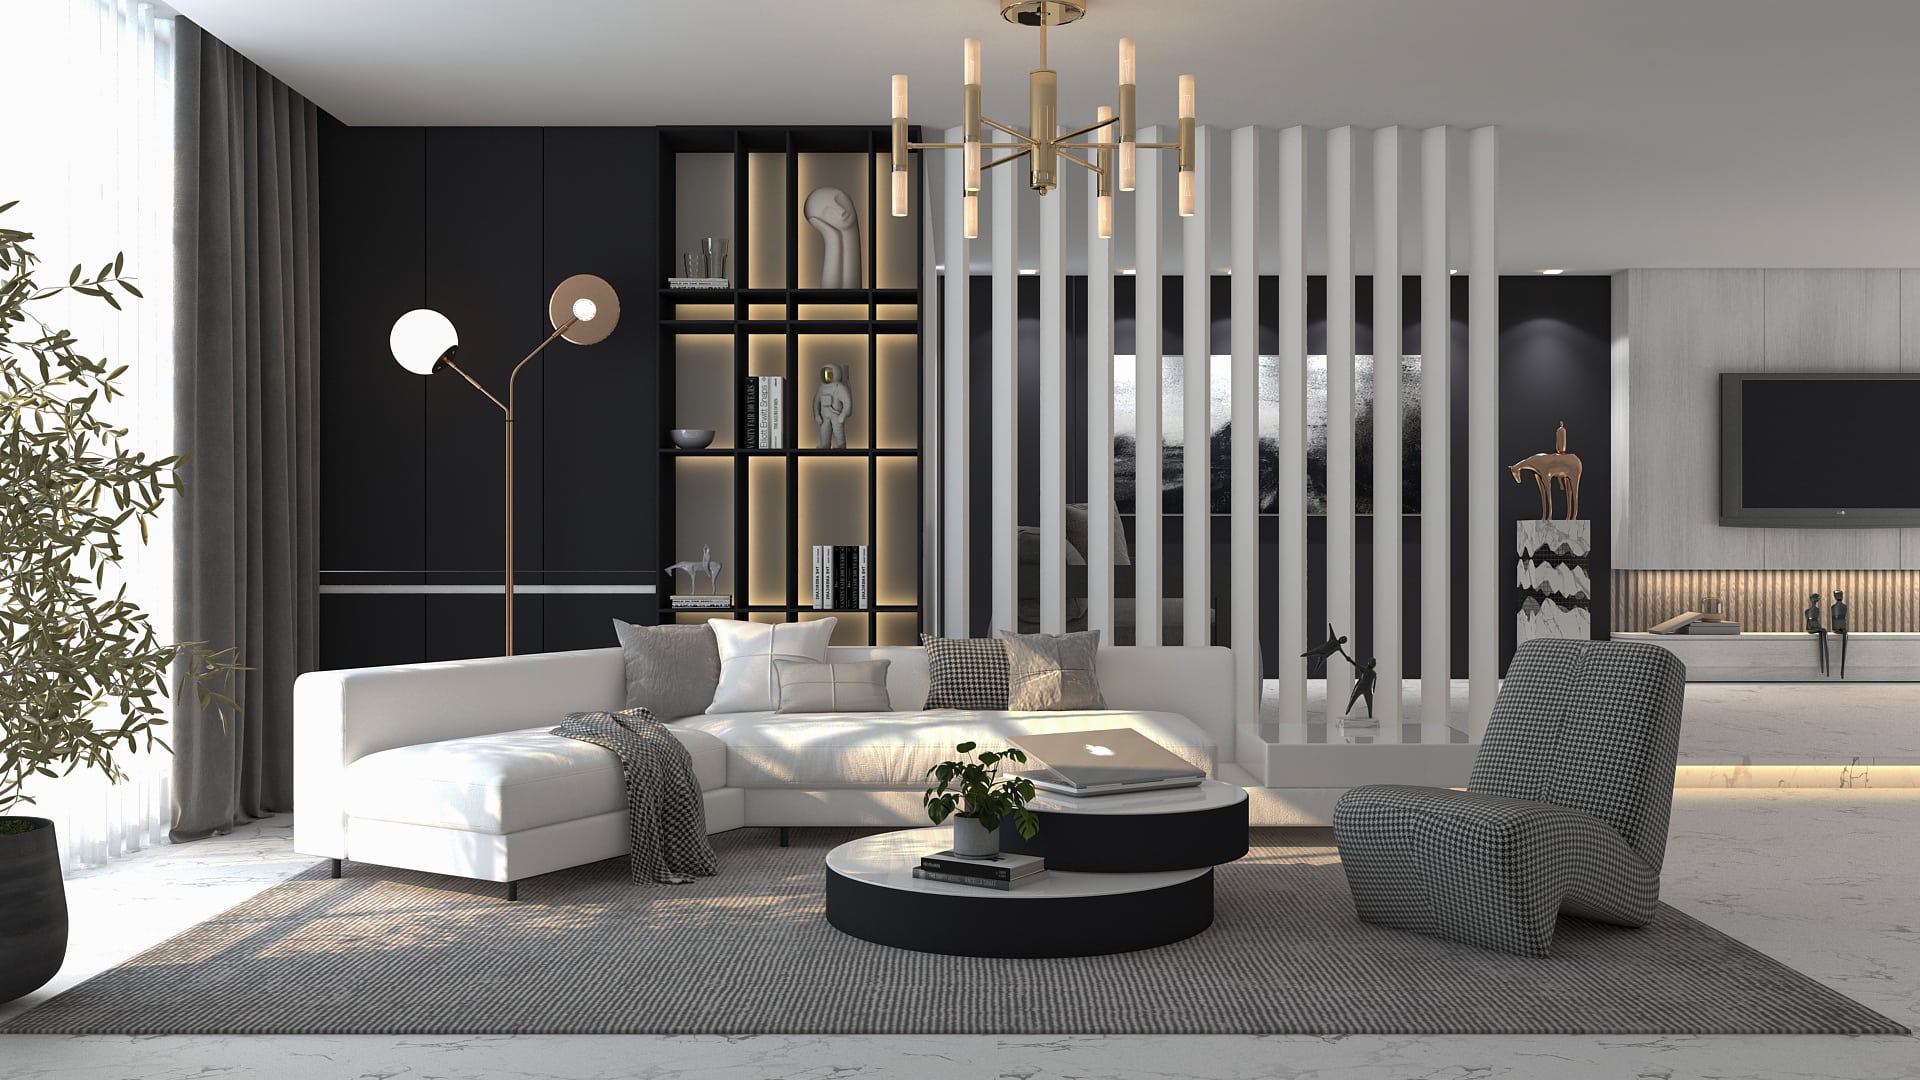 Luxury black and white living room ideas by Homilo